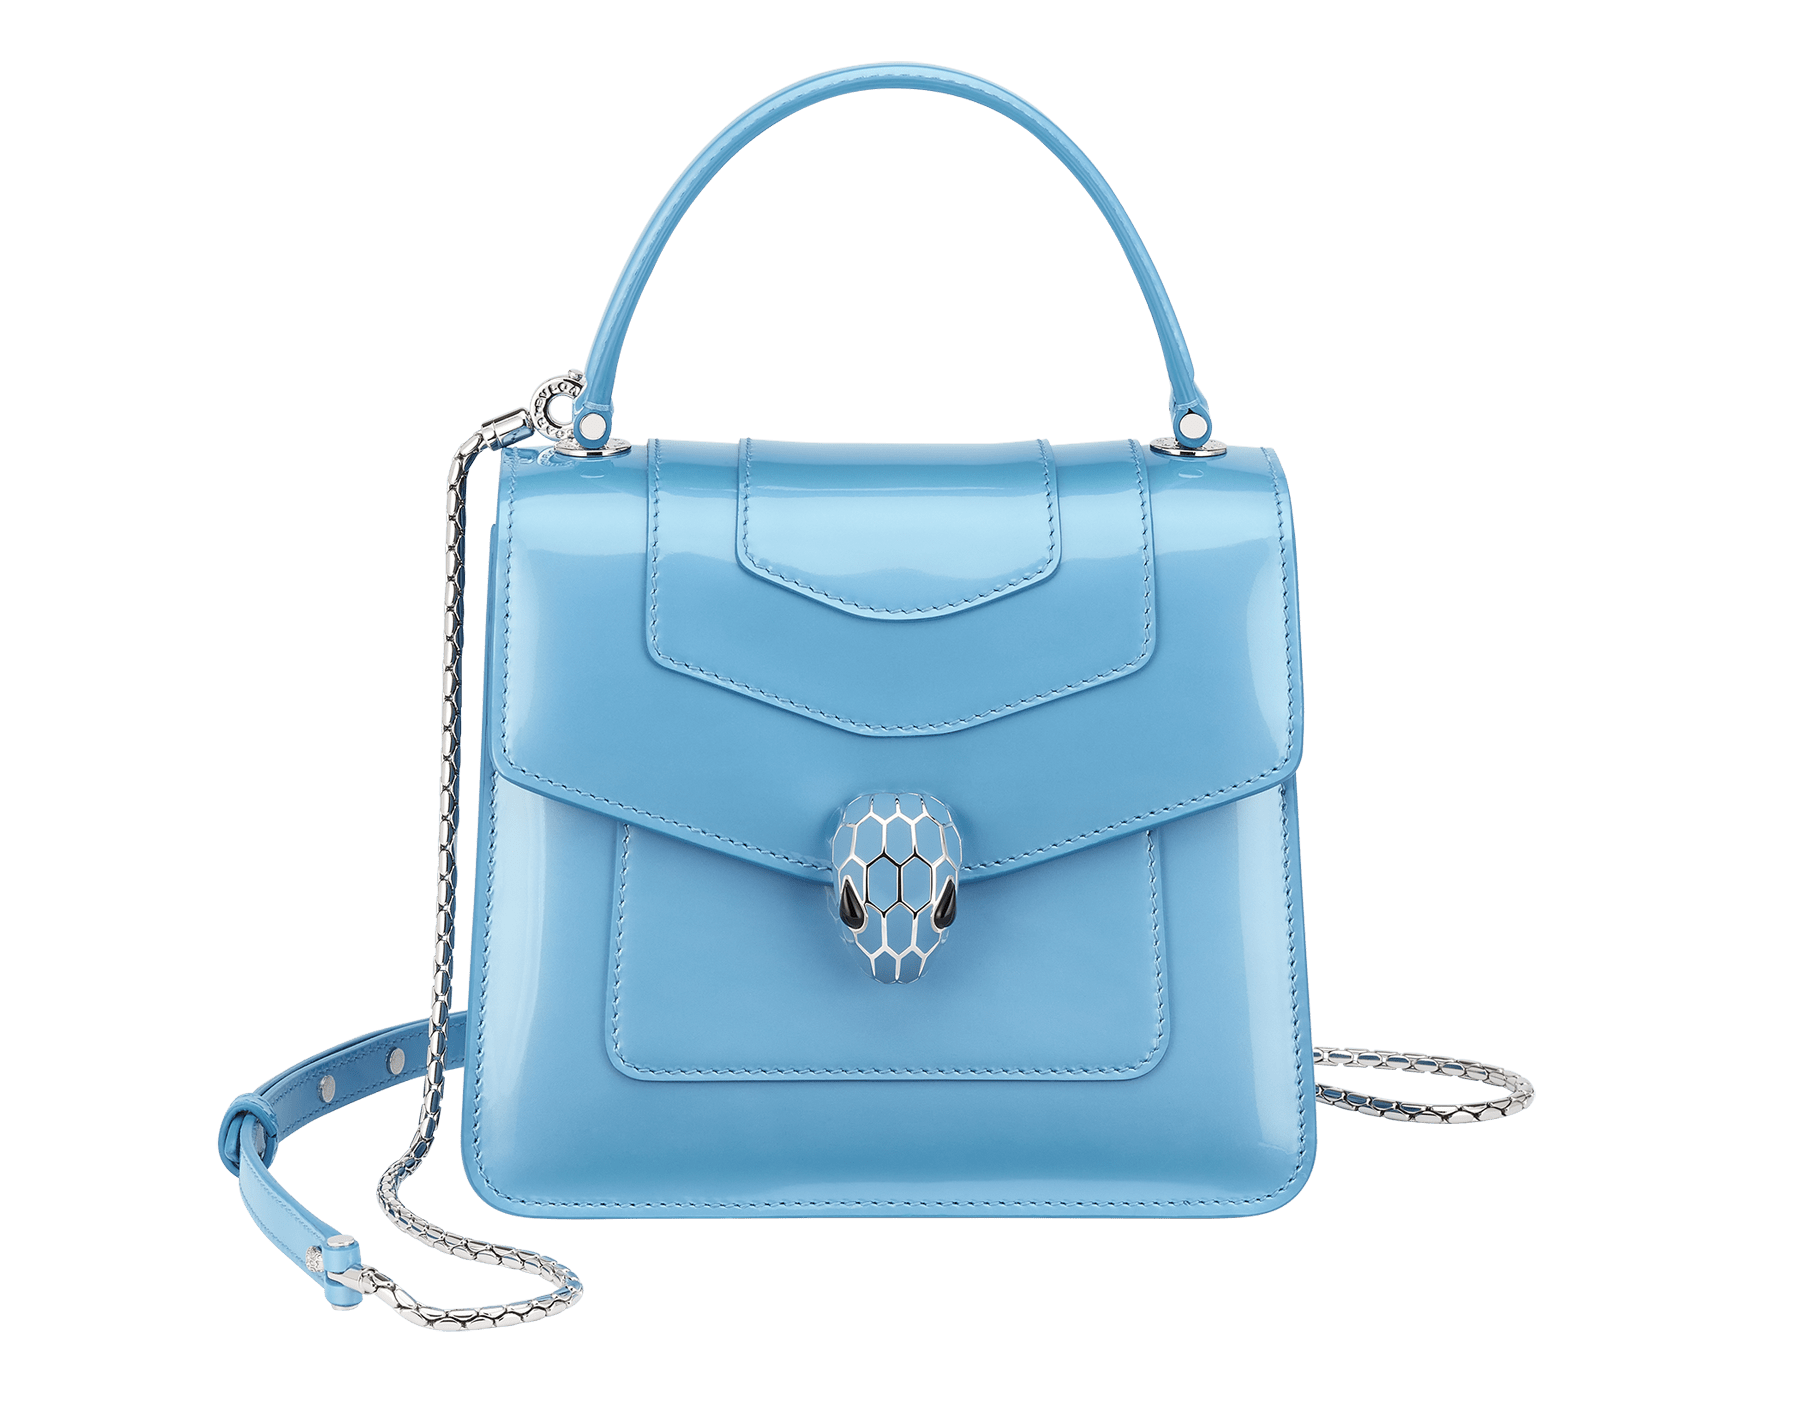 Serpenti Forever top handle bag in Niagara sapphire blue varnished calf leather with black gros grain lining. Captivating snakehead closure in palladium-plated brass embellished with matt Niagara sapphire blue enamel scales and black onyx eyes. 291322 image 1